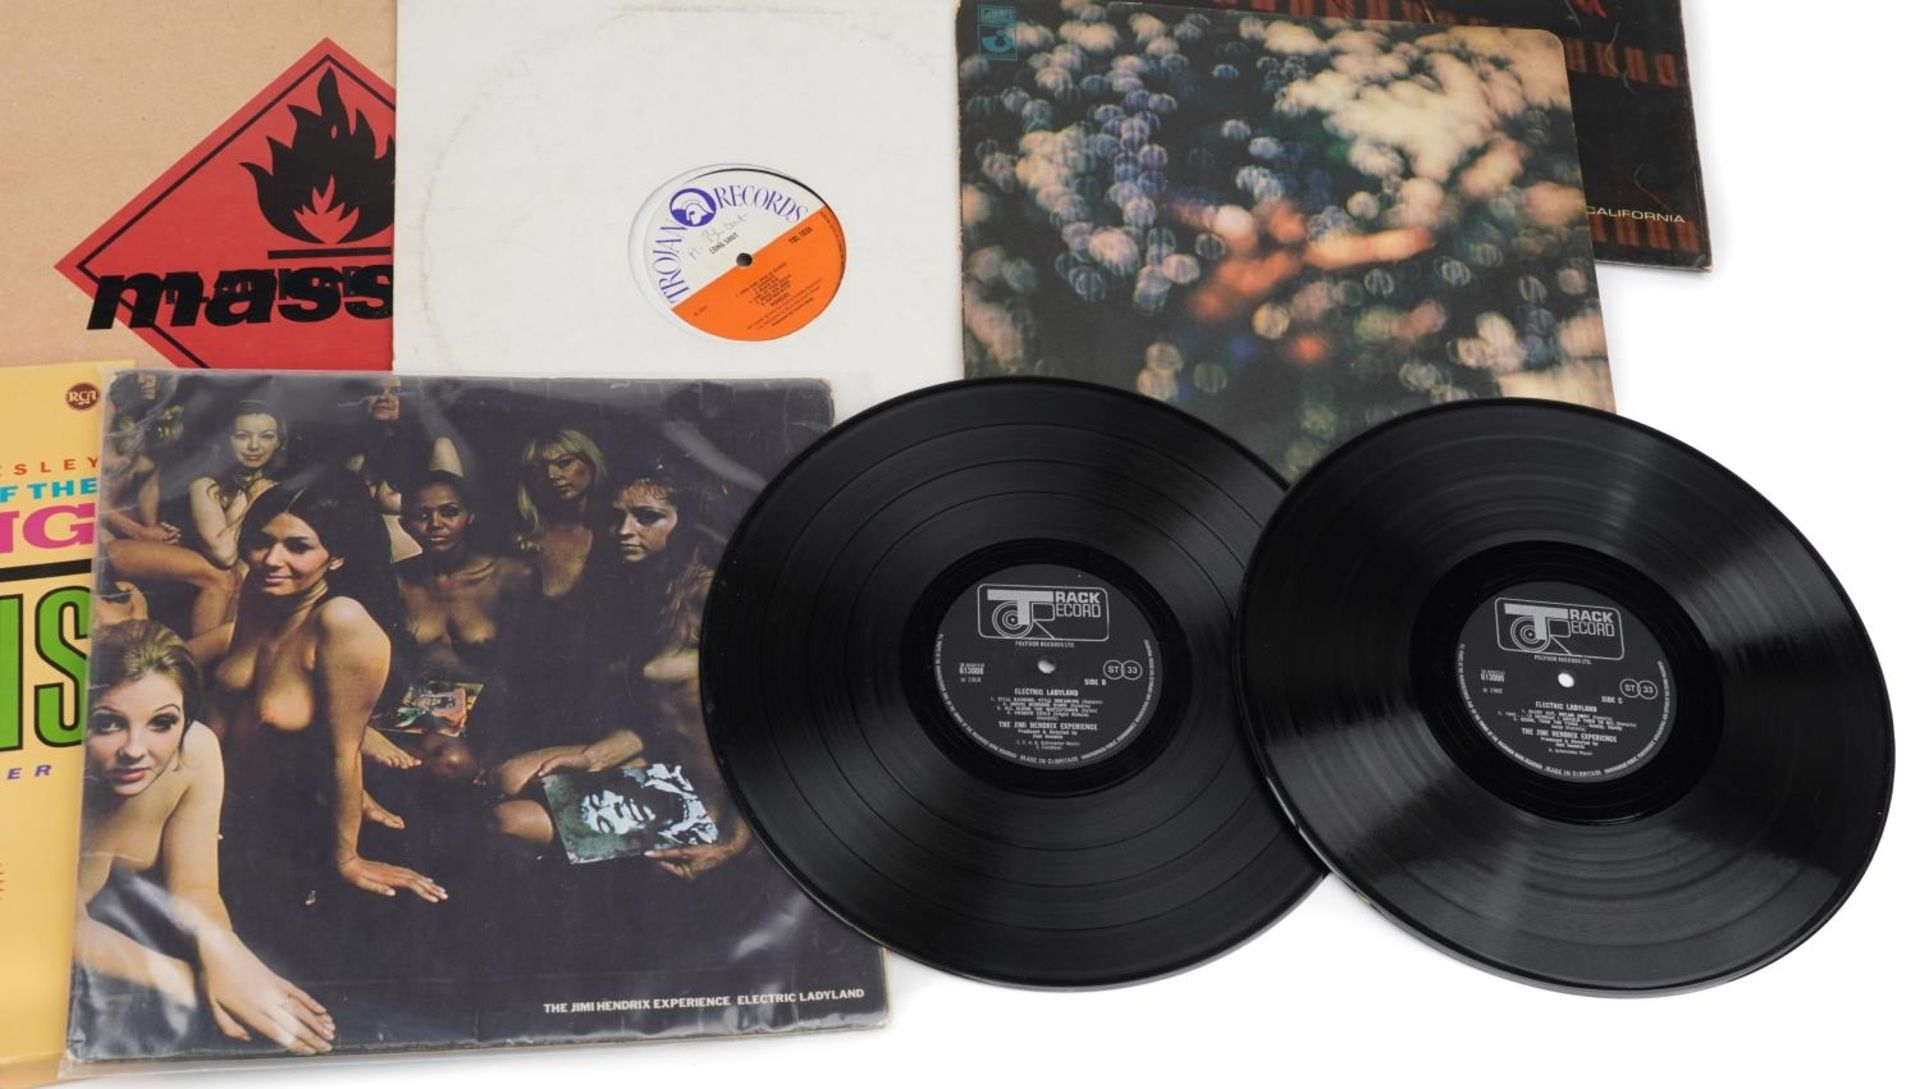 Vinyl LP records including The Jimi Hendrix Experience Electric Ladyland with blue text, Fleetwood - Image 4 of 4